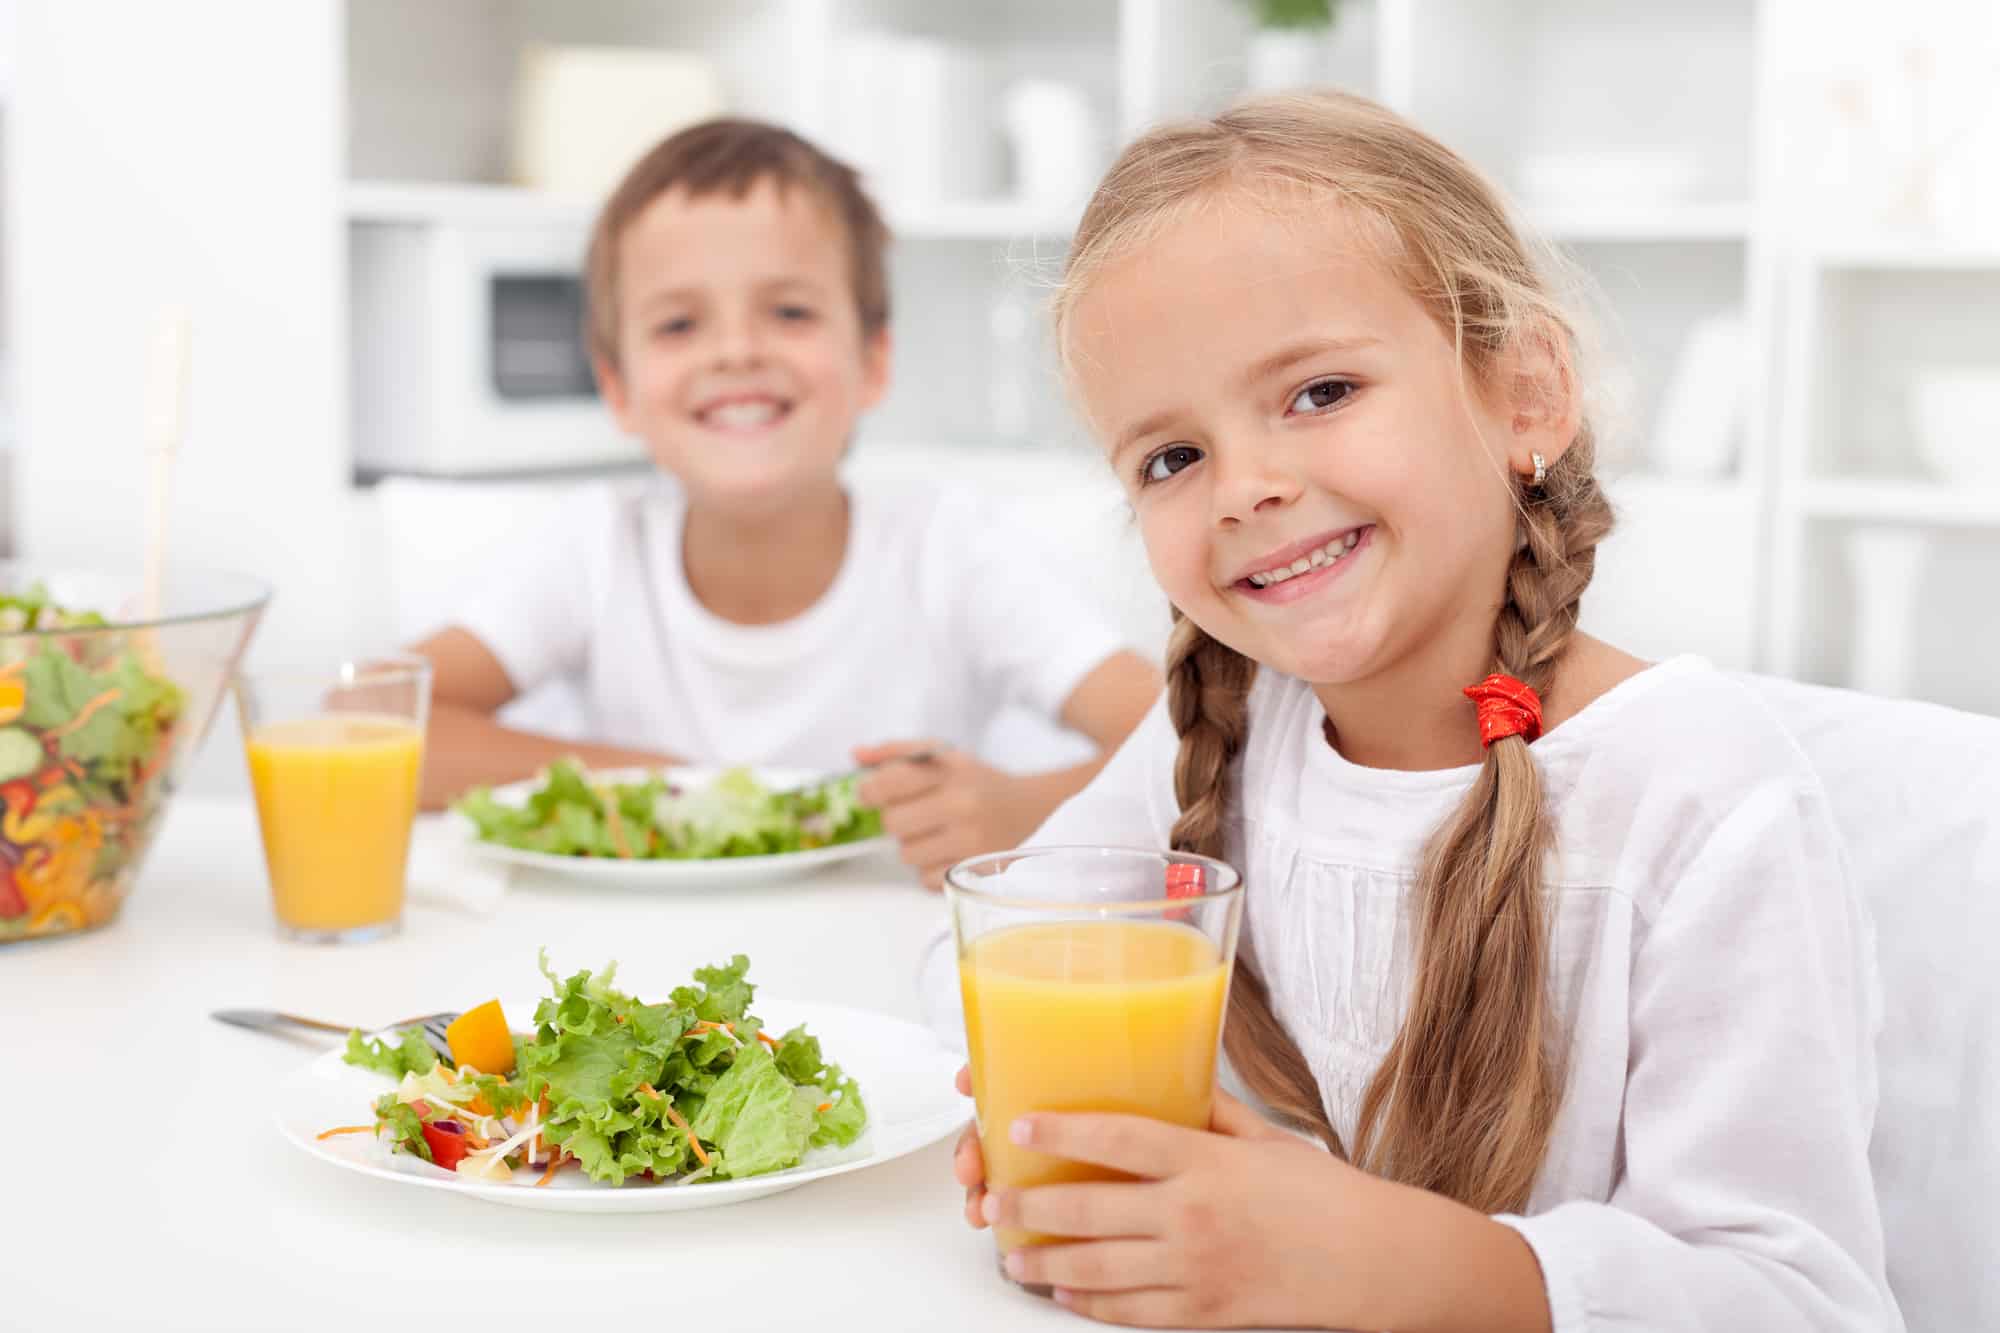 What Should My Child Eat for Breakfast?